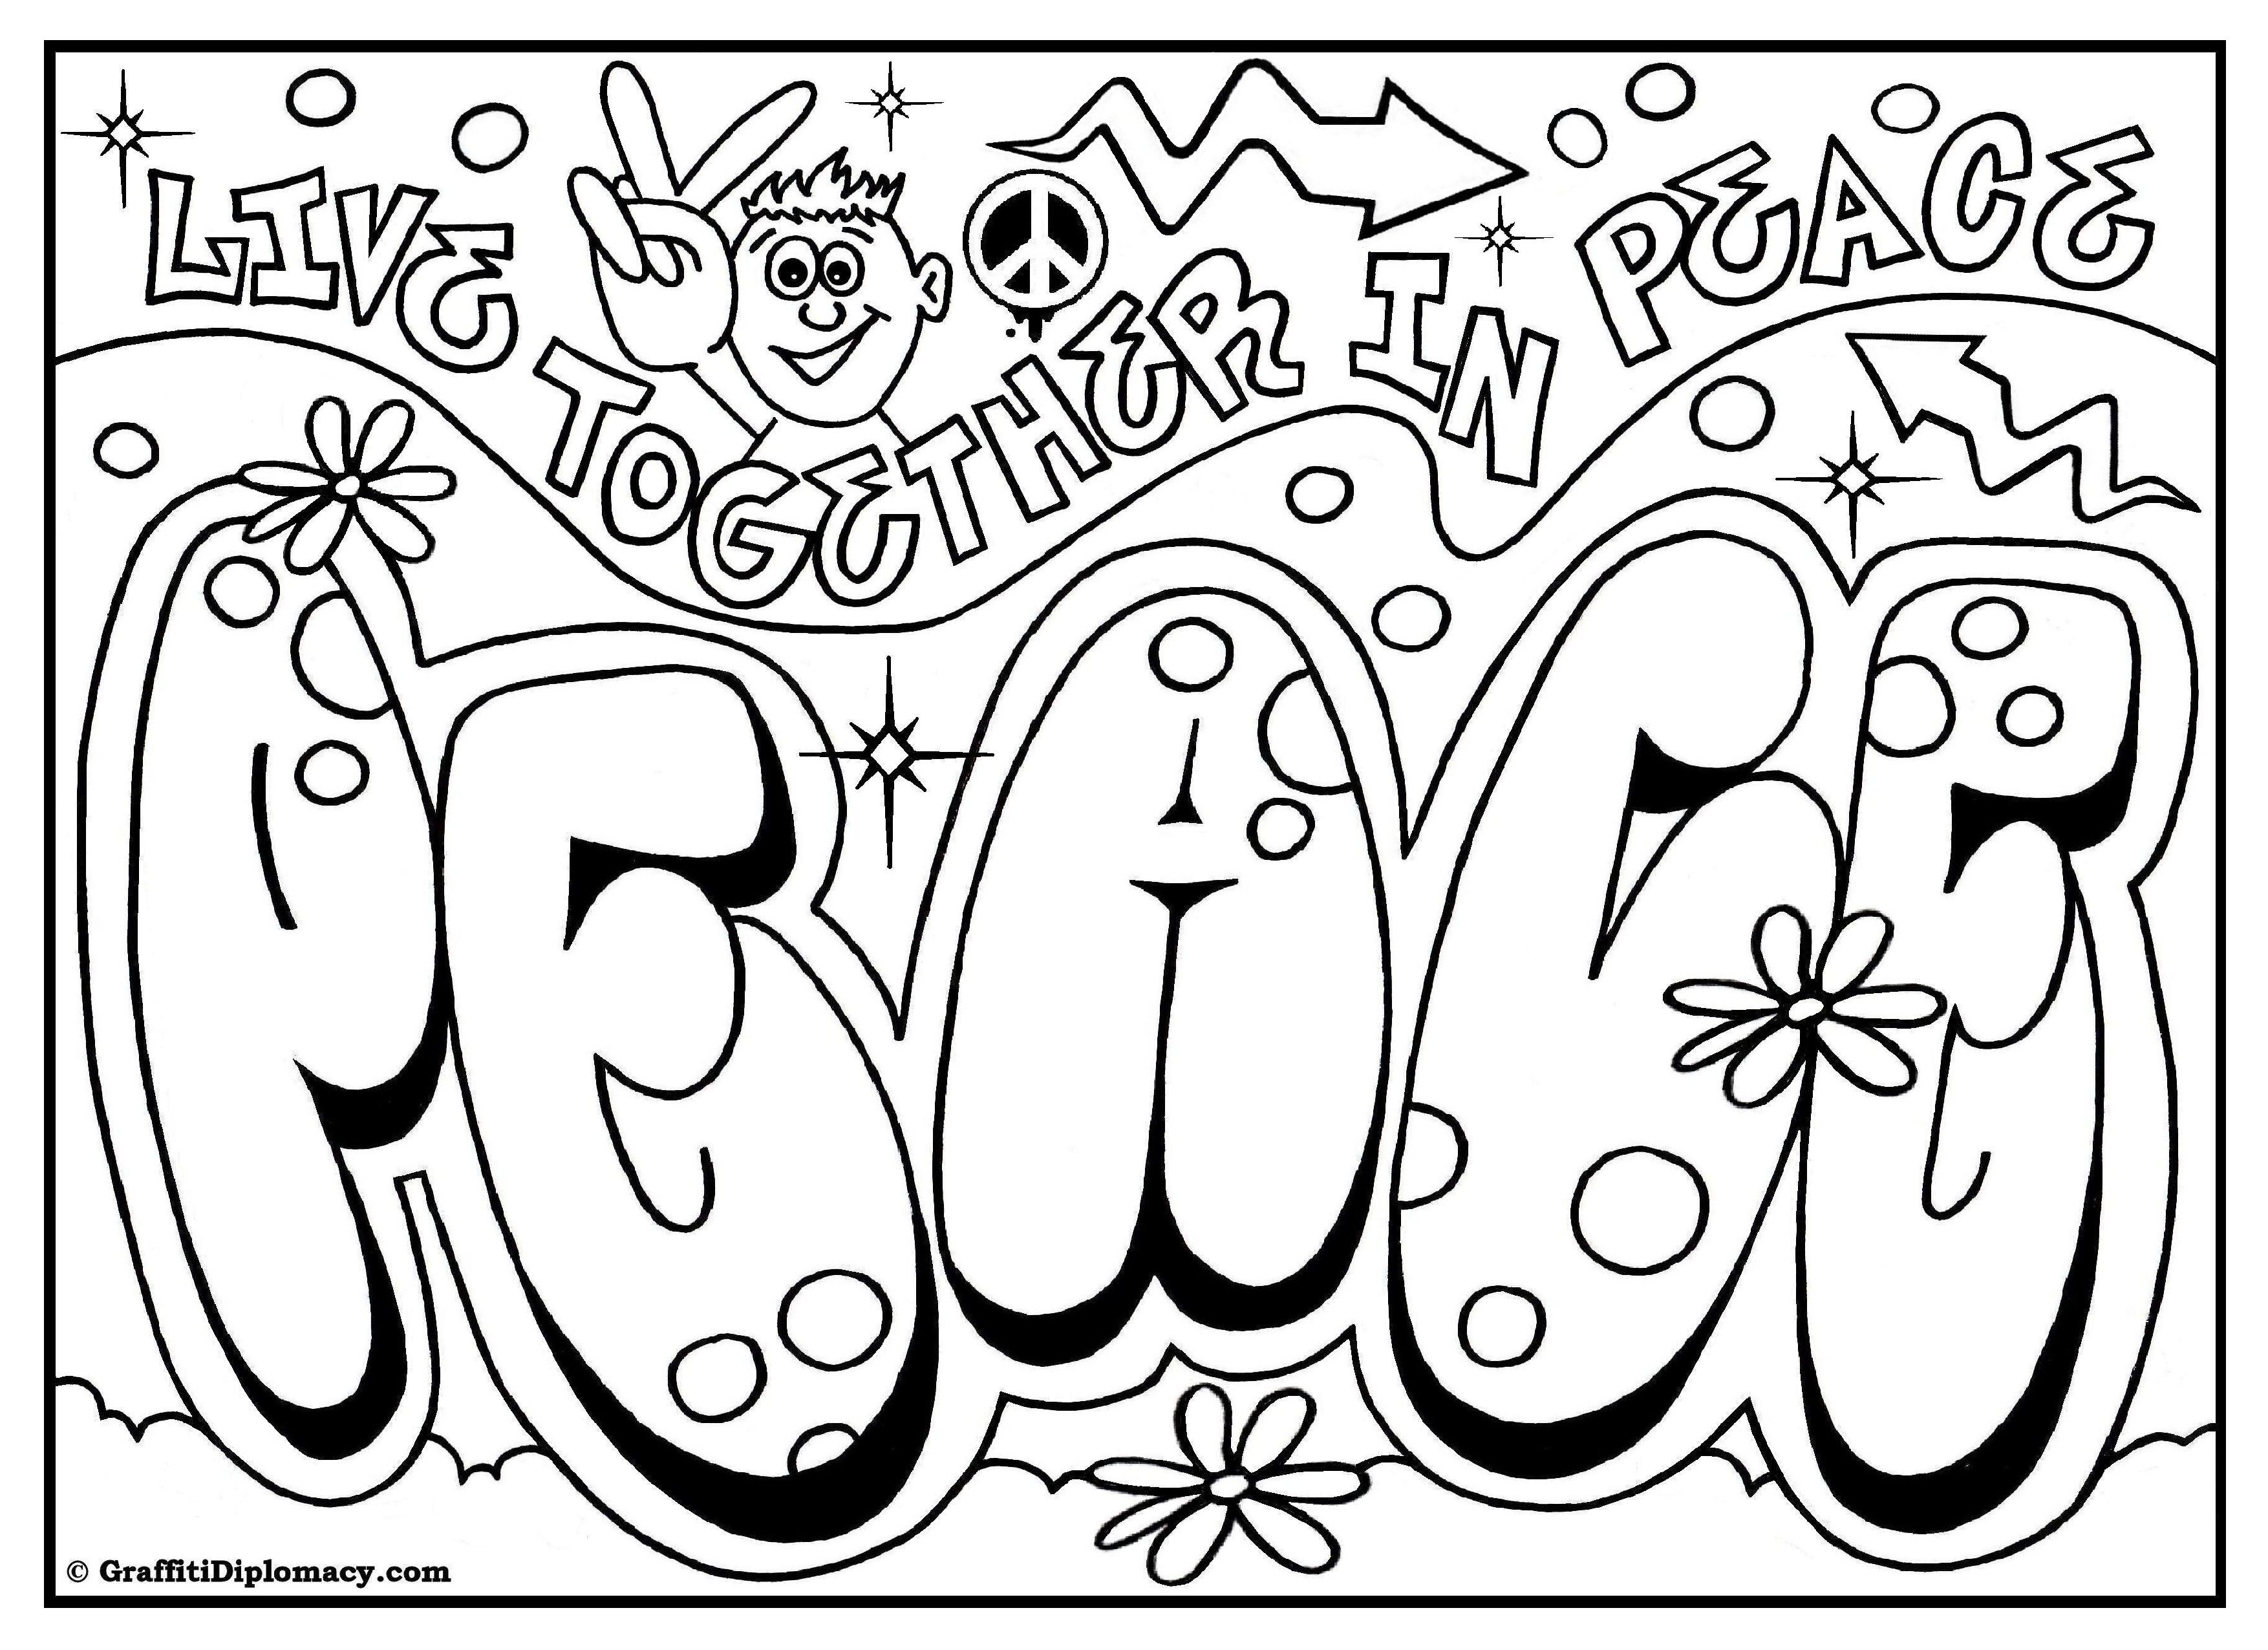 Graffiti Words Coloring Pages at GetDrawings Free download